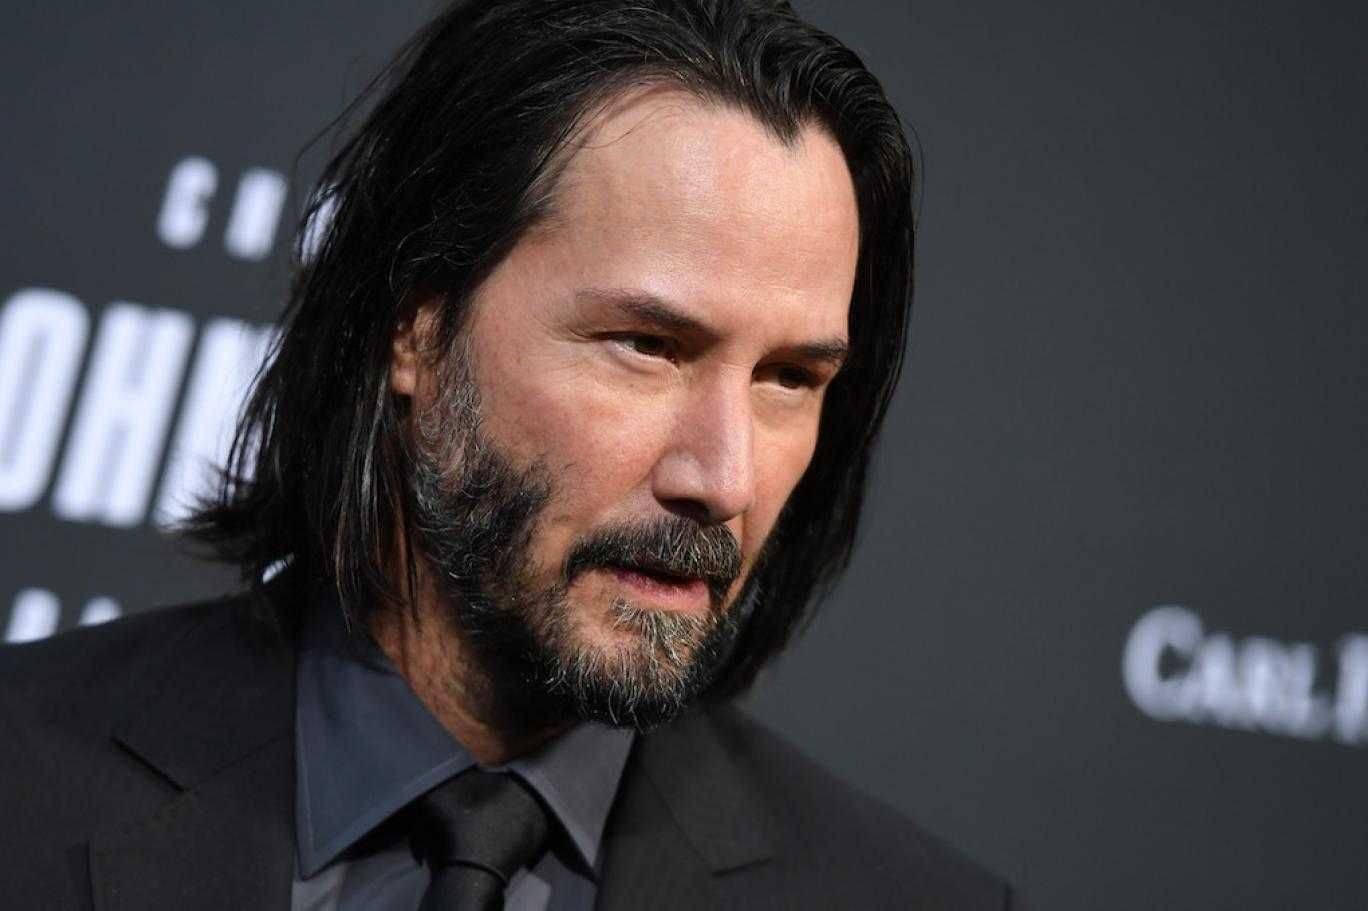 'Due to relevant laws, regulations and policies": Keanu Reeves' support for Tibet results in film blackout